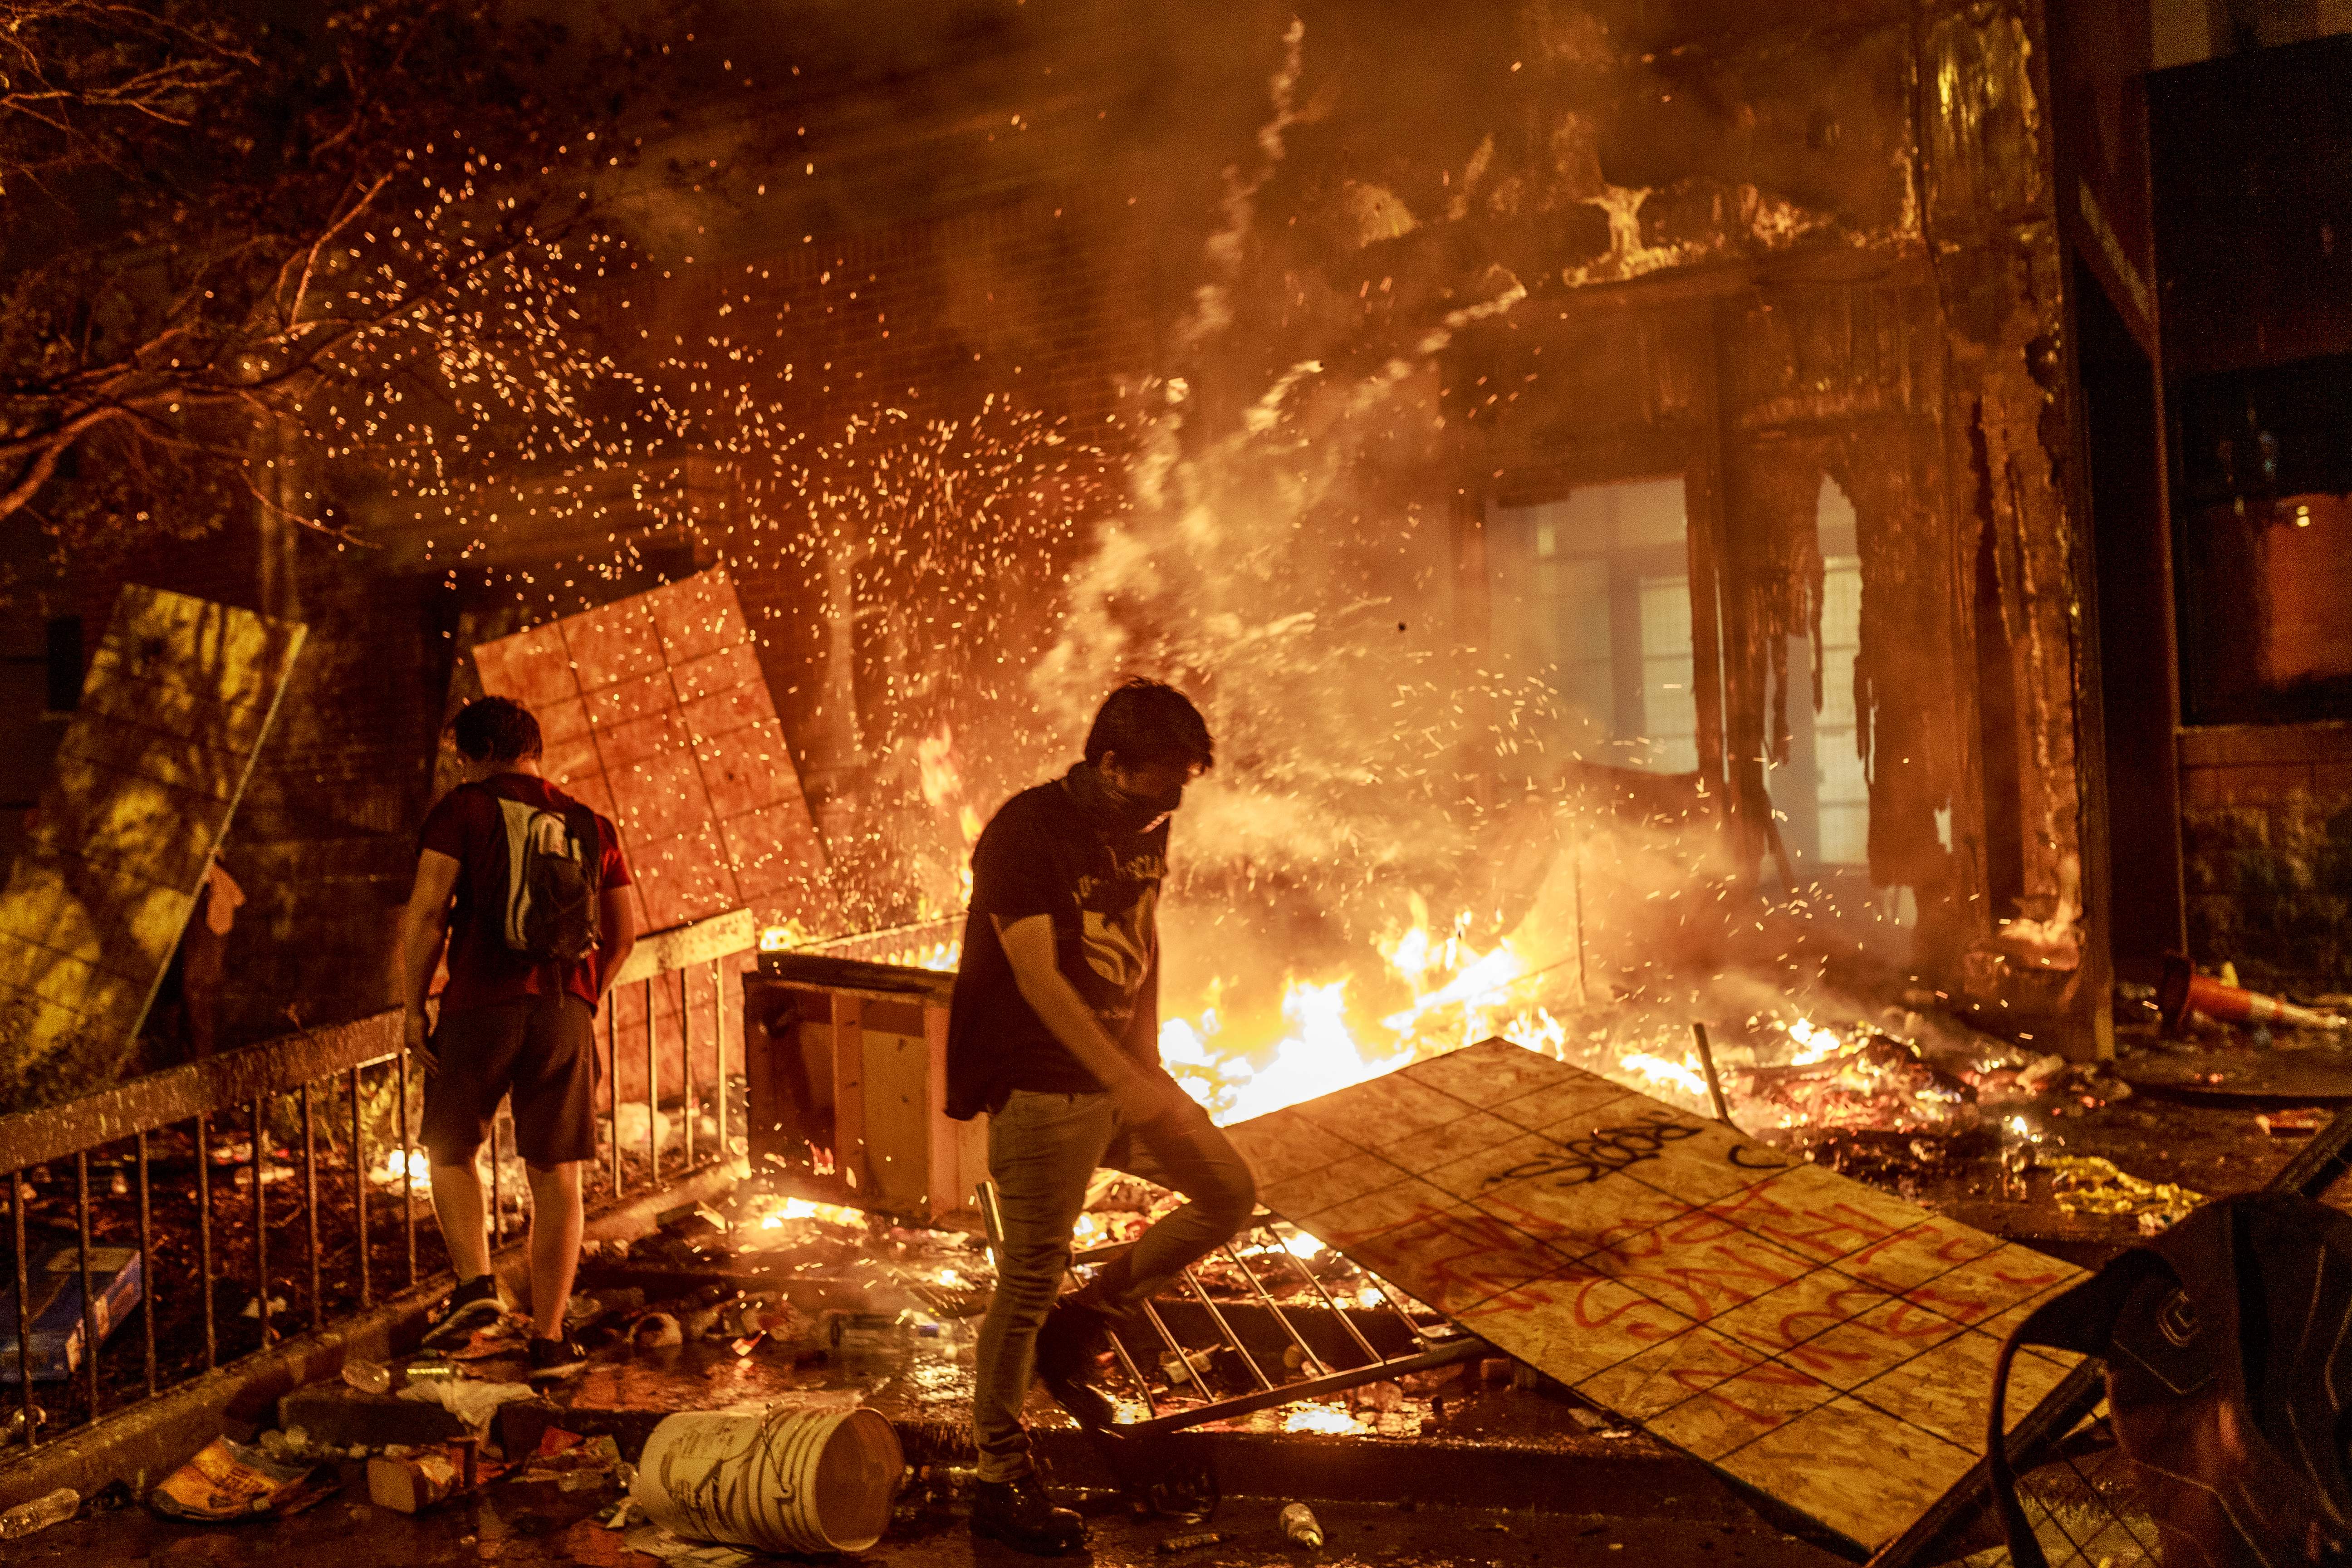 Protesters walk past burning debris outside the Third Police Precinct on May 28, 2020 in Minneapolis, Minnesota. (Photo by KEREM YUCEL/AFP via Getty Images)